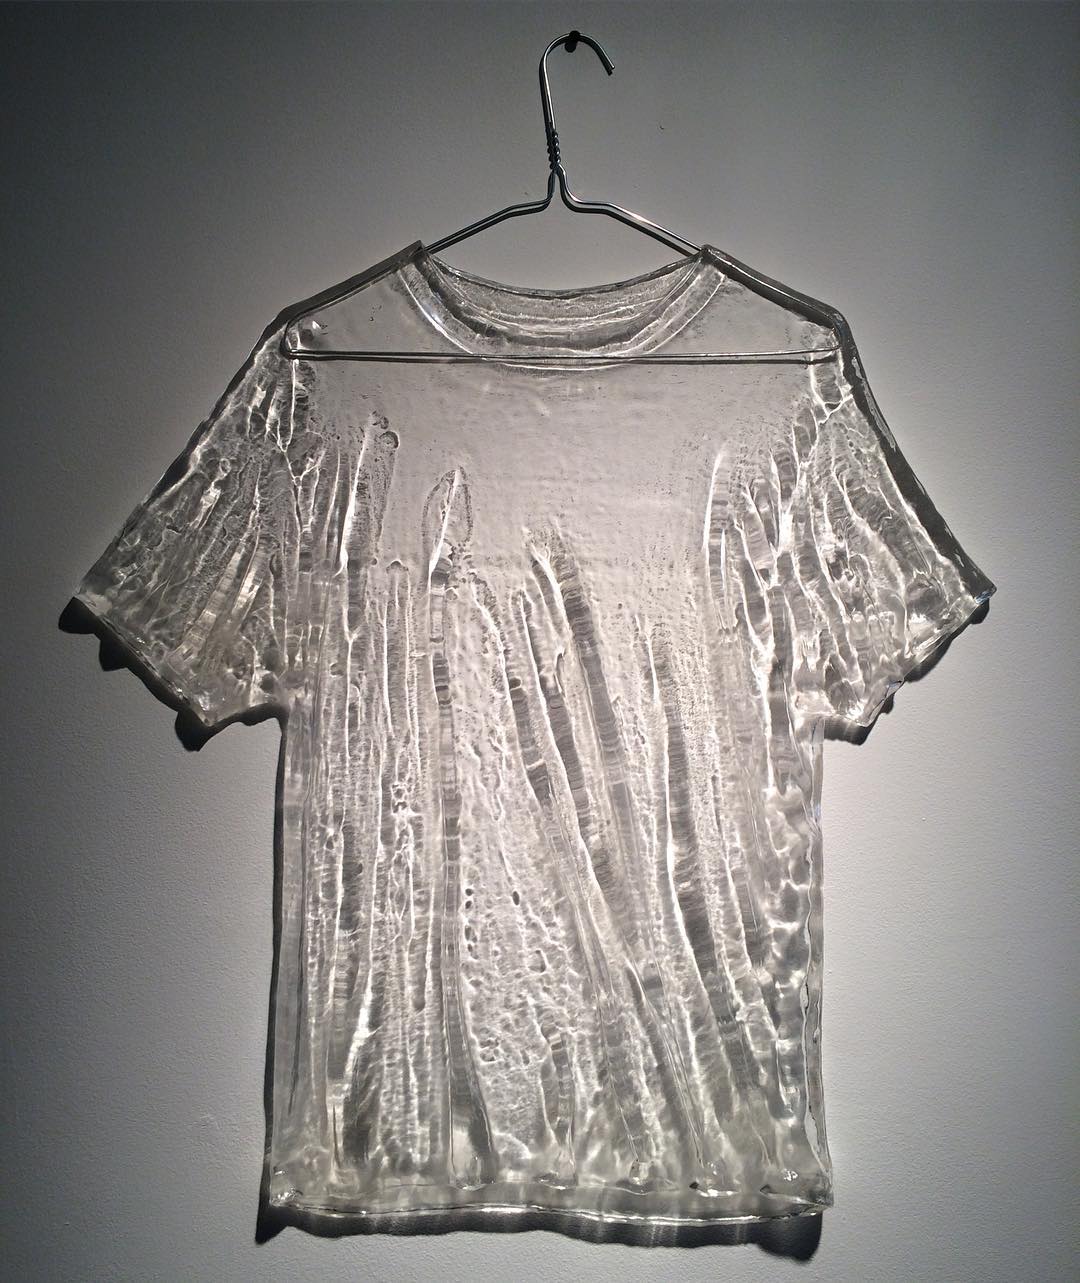 Clear Resin Sculptures Of Clothes And Objects By Chris Bakay (15)